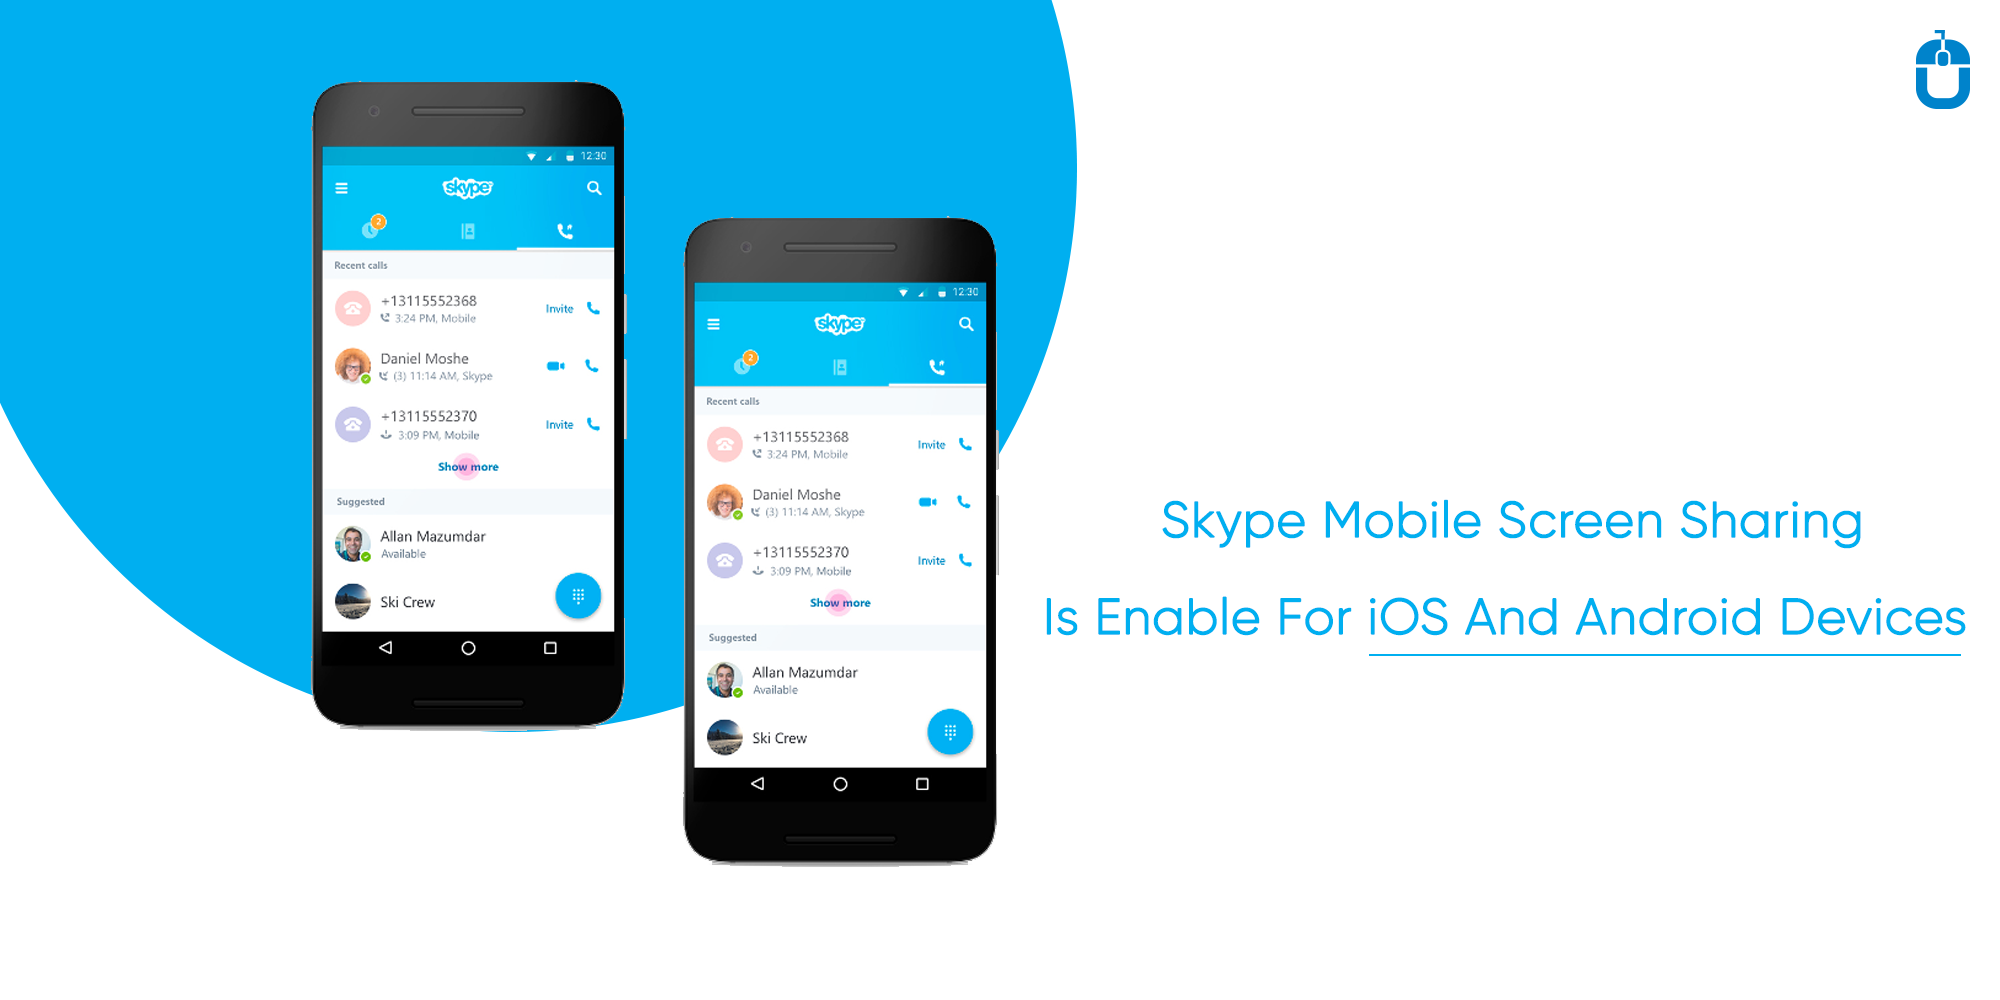 Skype Mobile Screen Sharing Is Enable For iOS And Android Devices